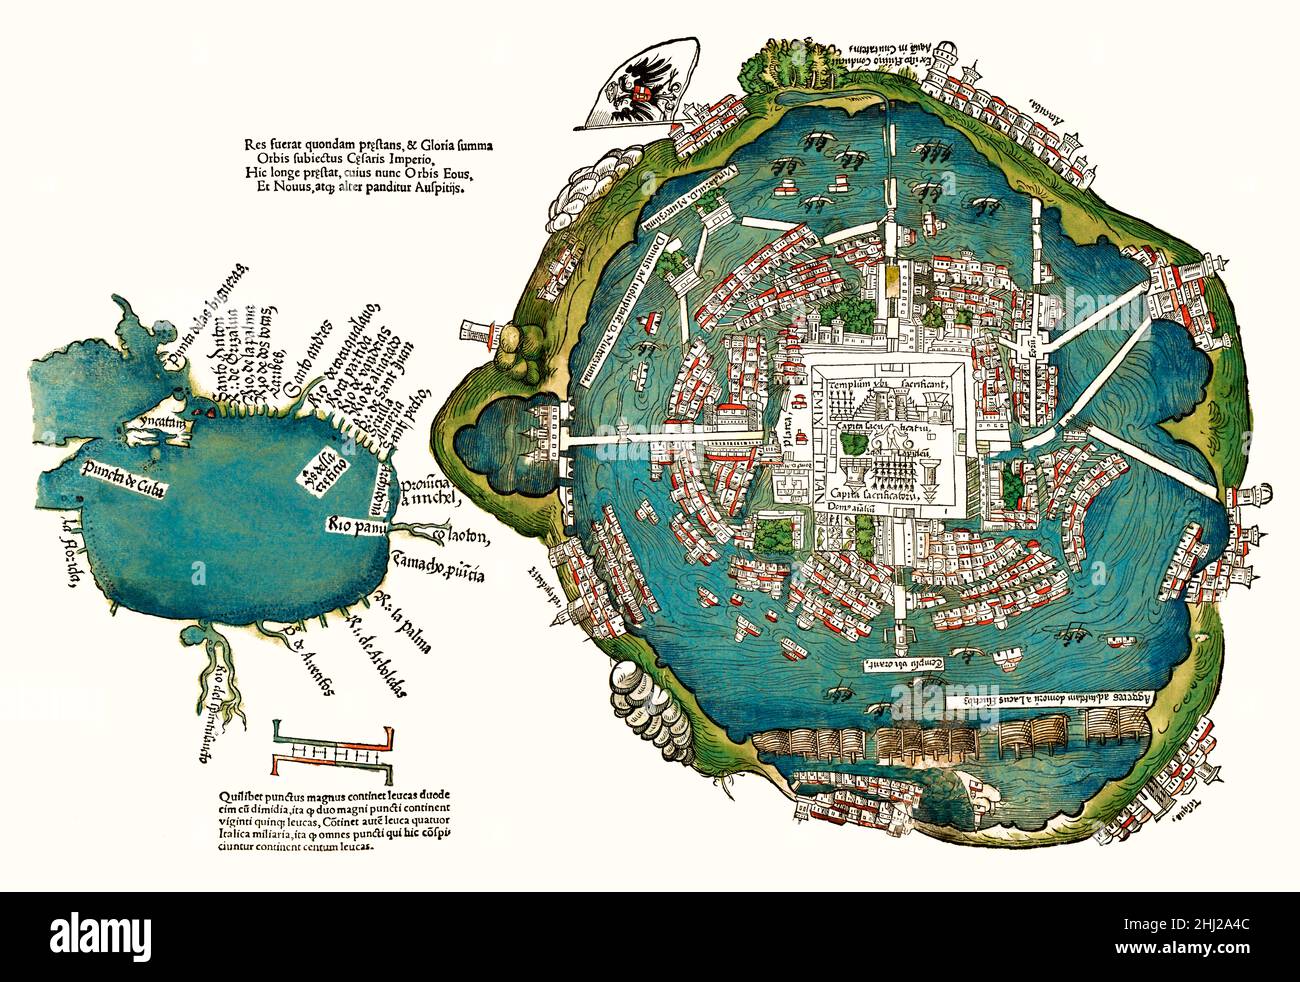 Plan of the Aztec city of Tenochtitlán (present-day Mexico City) by Hernán Cortés, 1520, facsimile, digitally restored Stock Photo